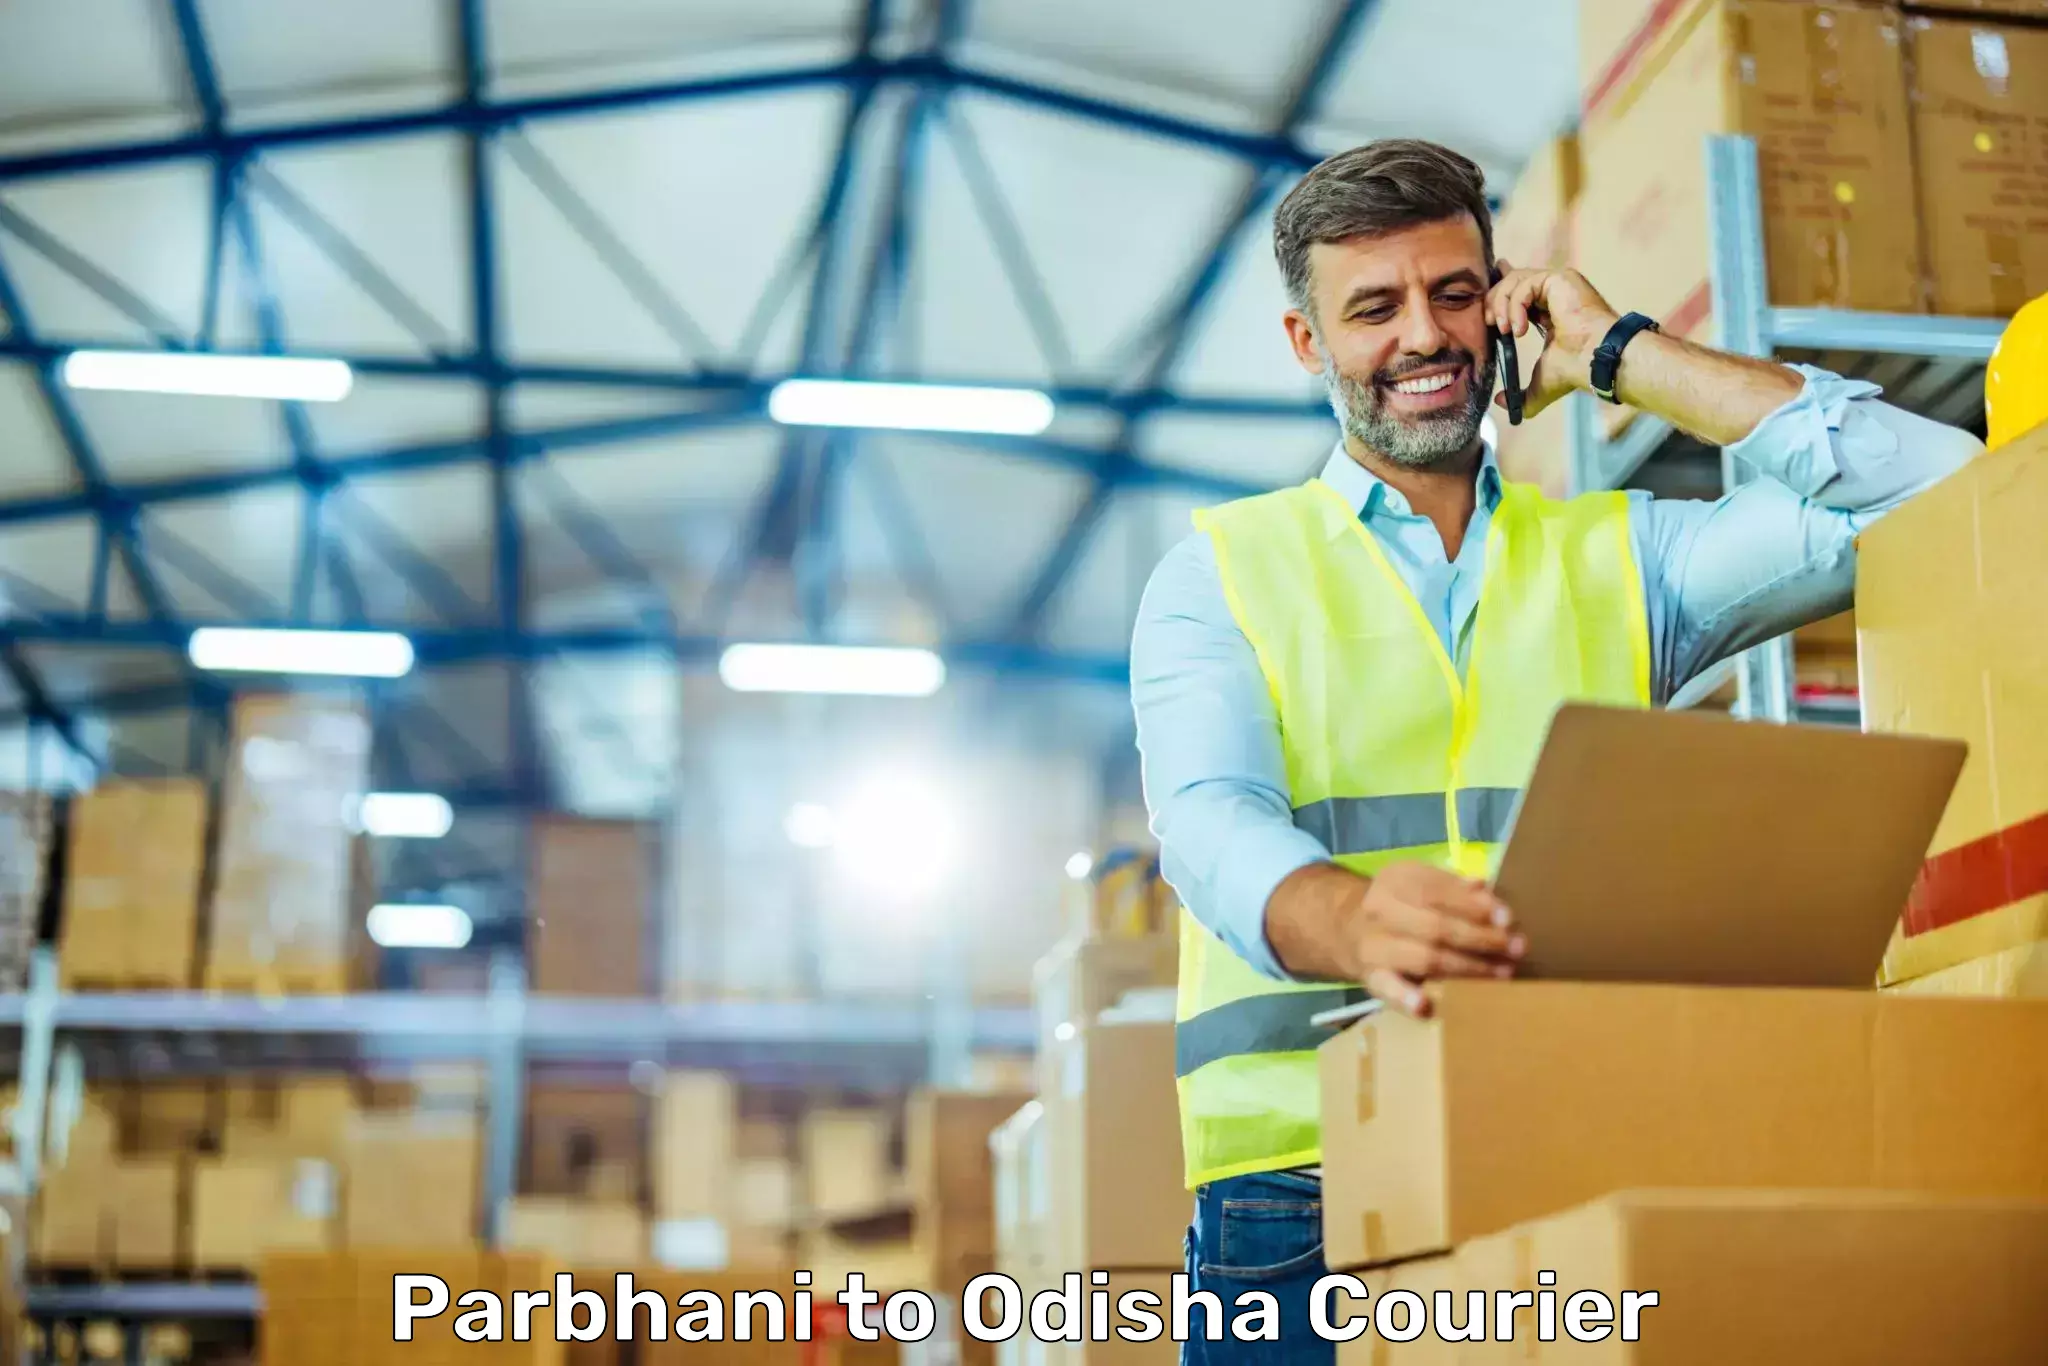 Courier service innovation in Parbhani to Odisha